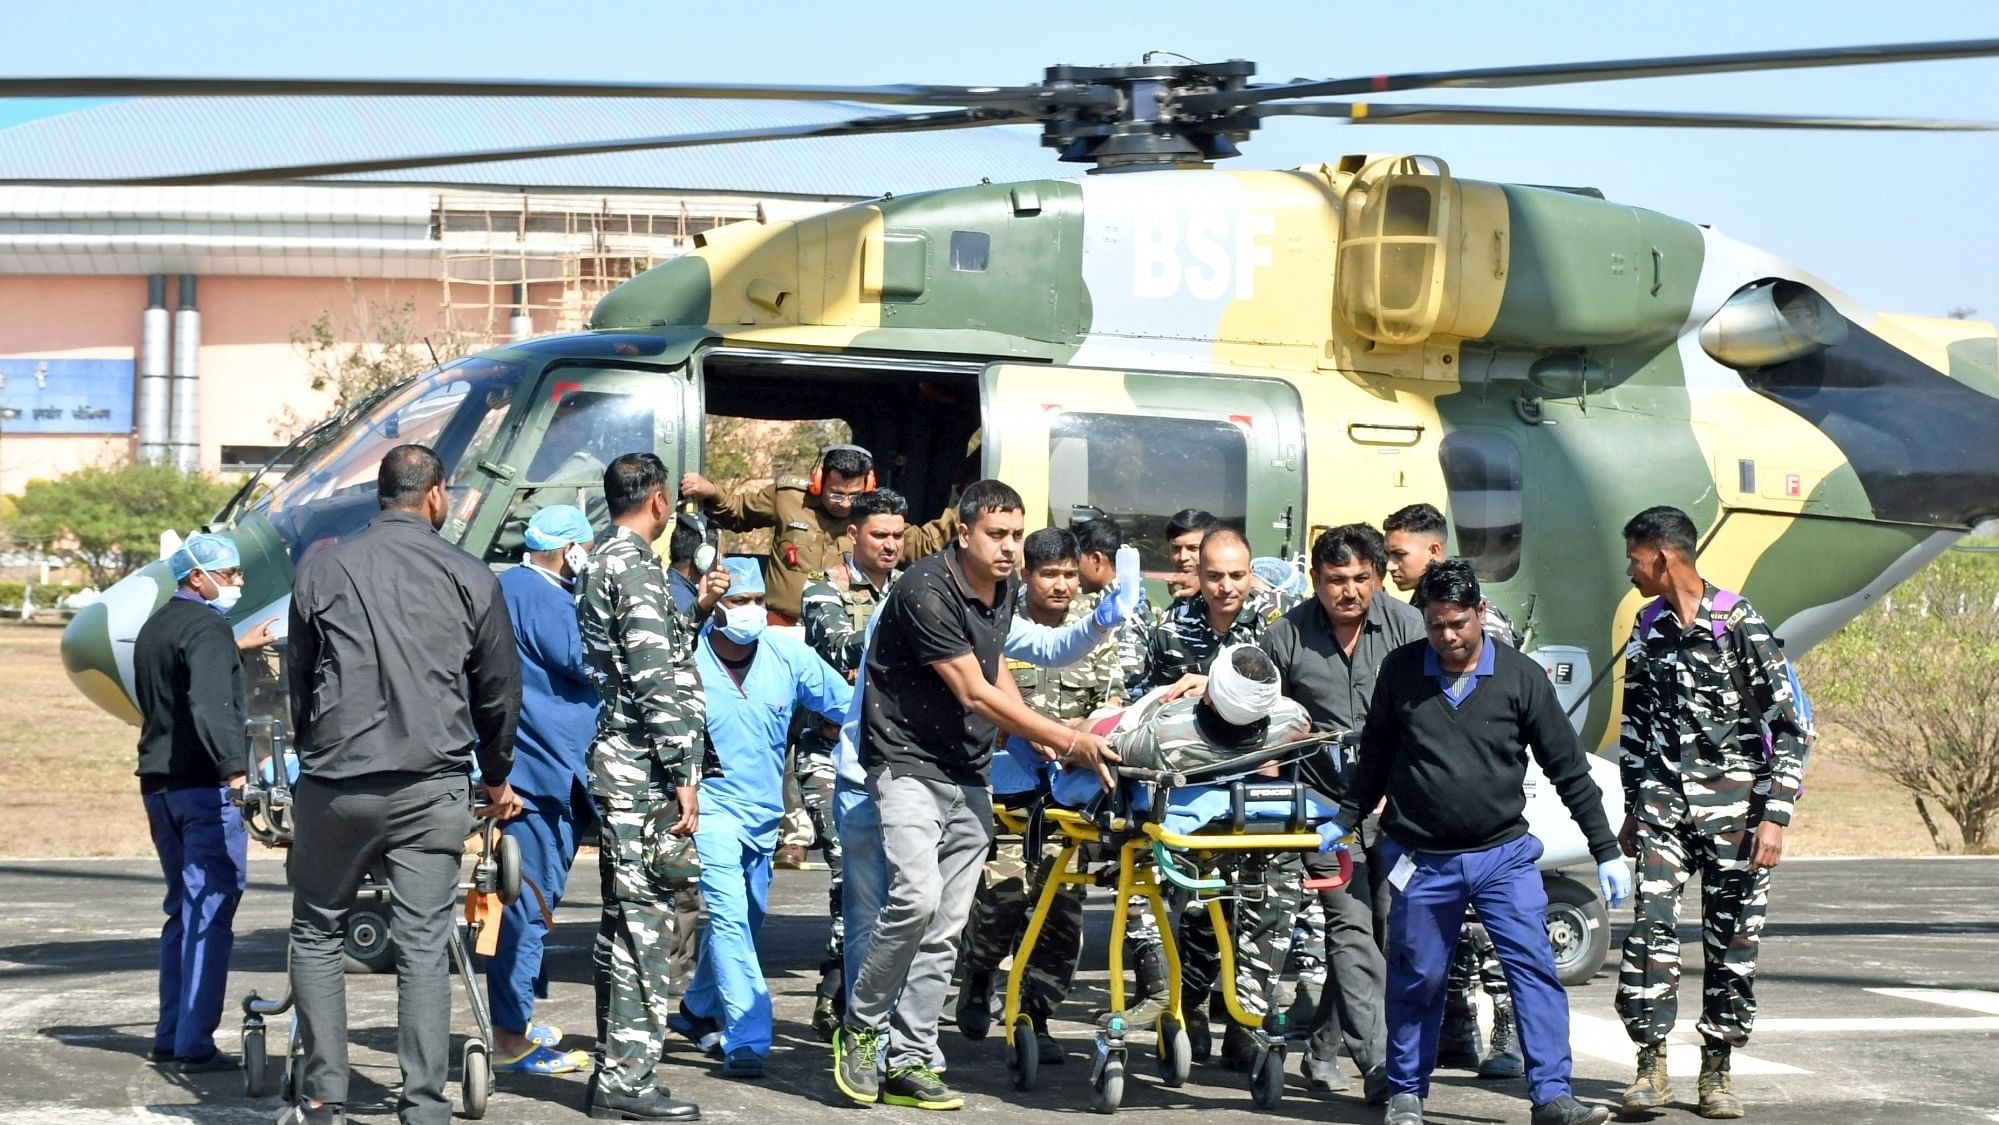 An injured paramilitary jawan of CRPF is being taken to hospital for further treatment after an IED blast. Credit: IANS Photo